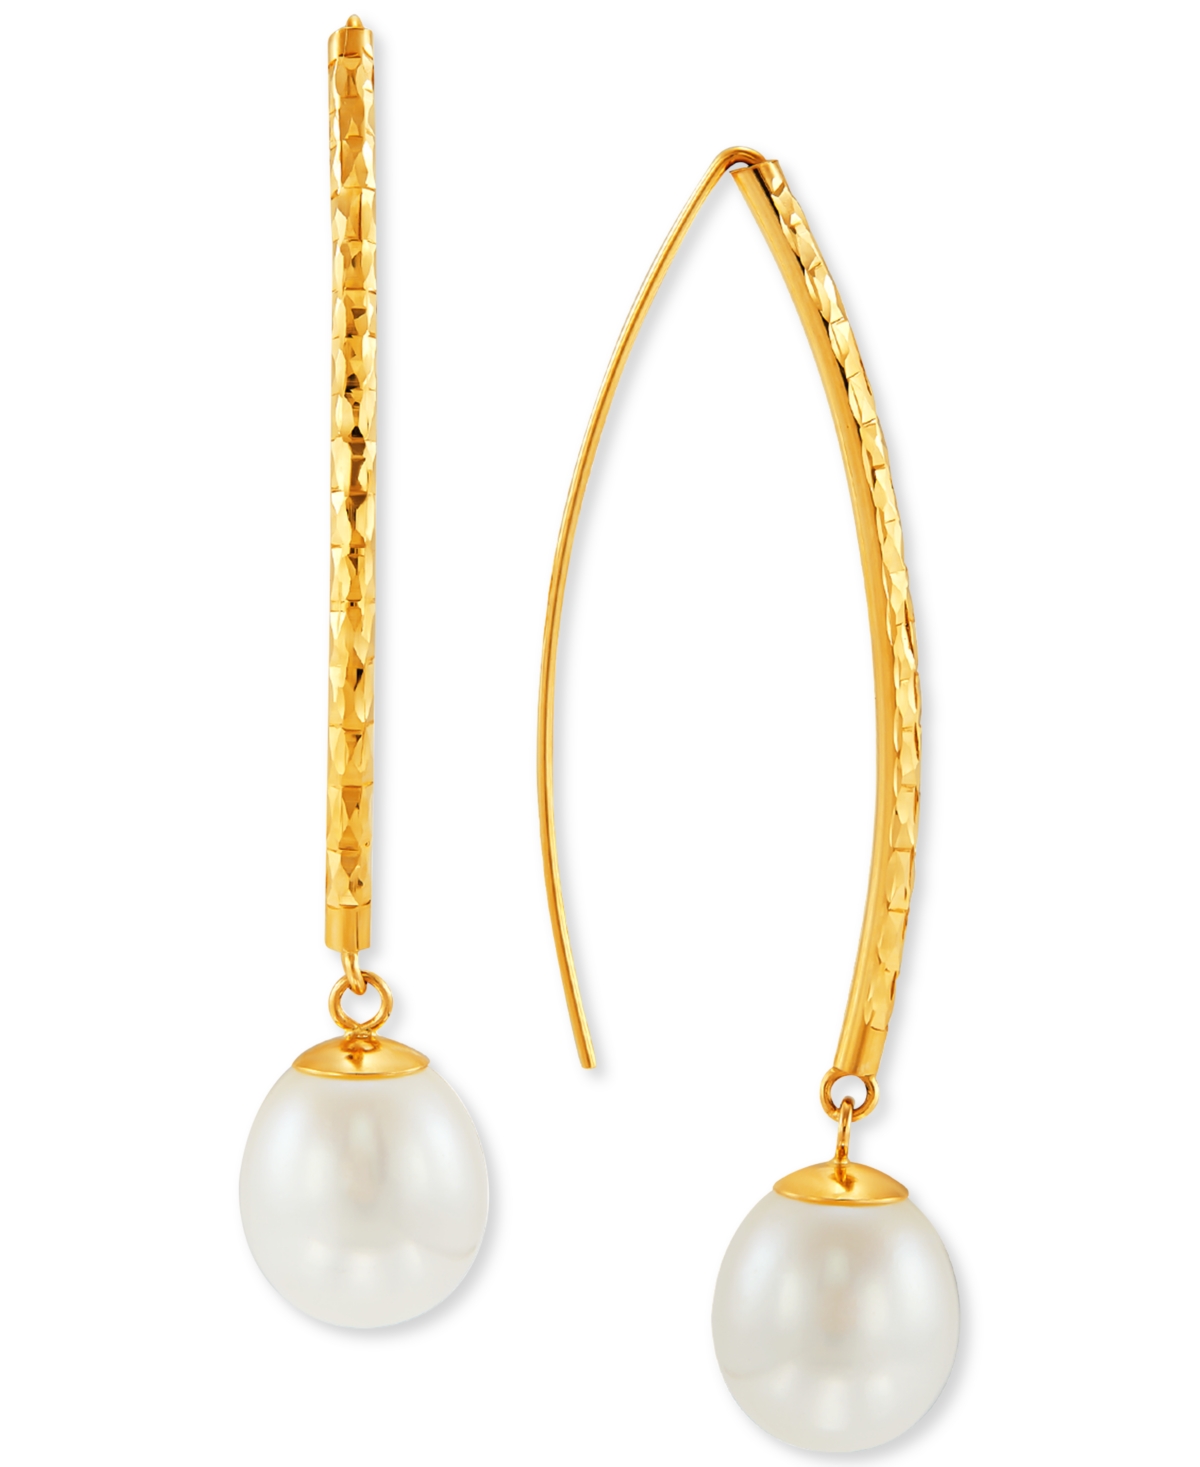 Cultured Freshwater Pearl (9-10mm) Threader Earrings in 14k Gold - Yellow Gold